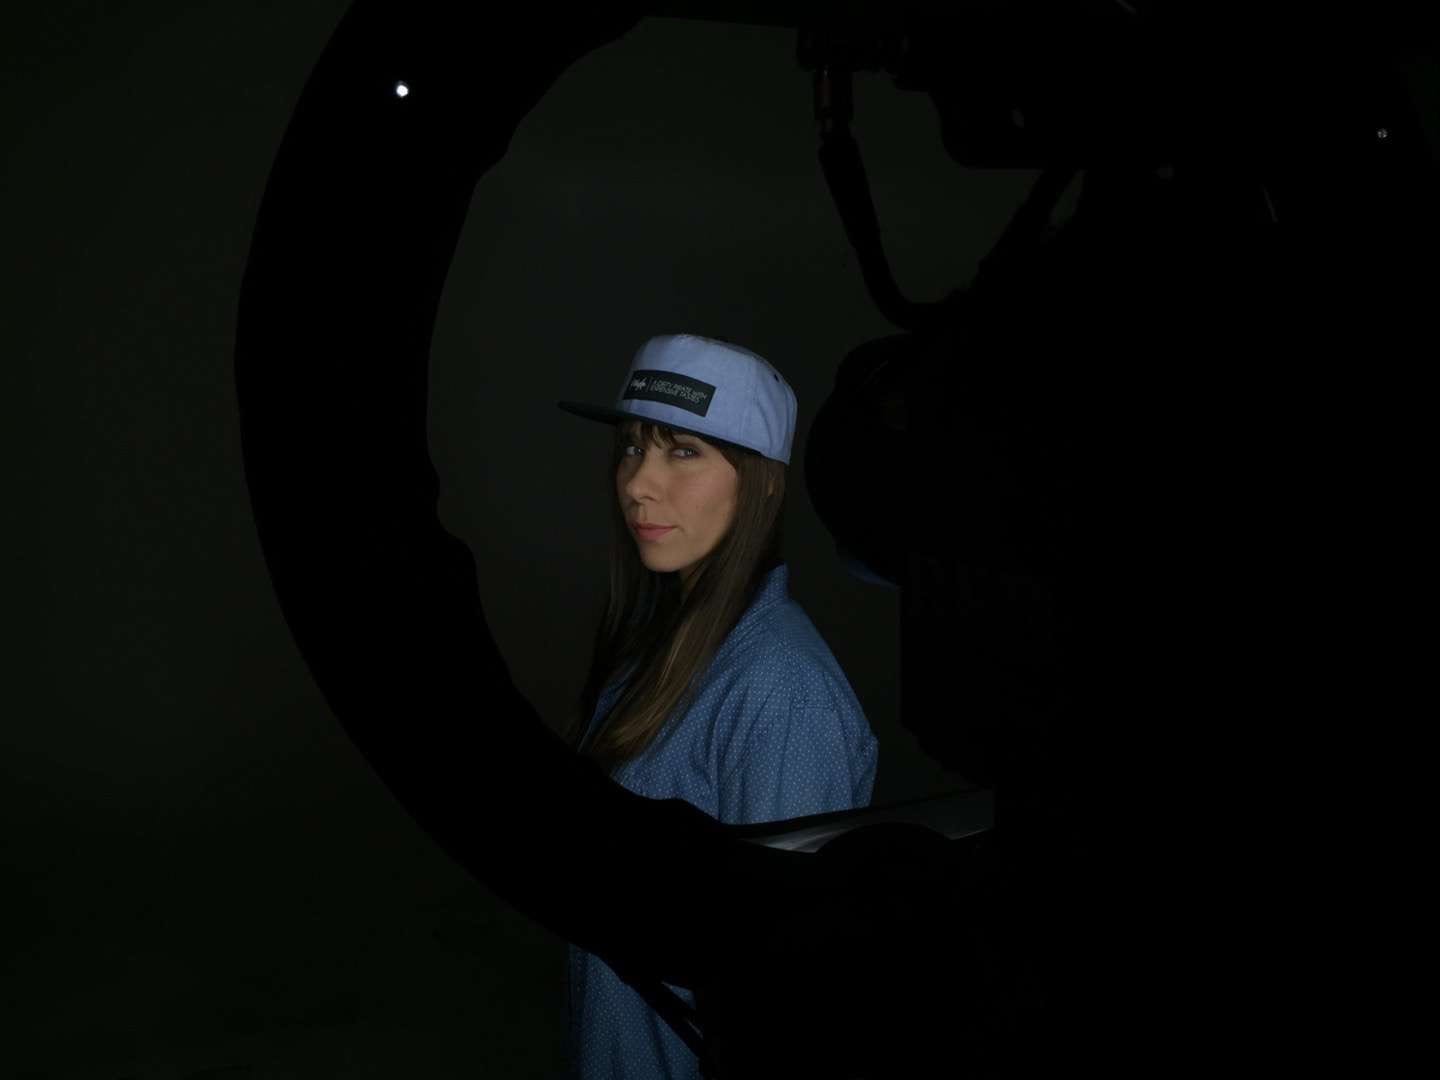 Filibuster Apparel Woman with long brown hair in a blue shirt wearing a light blue hat with black rim by video equipment